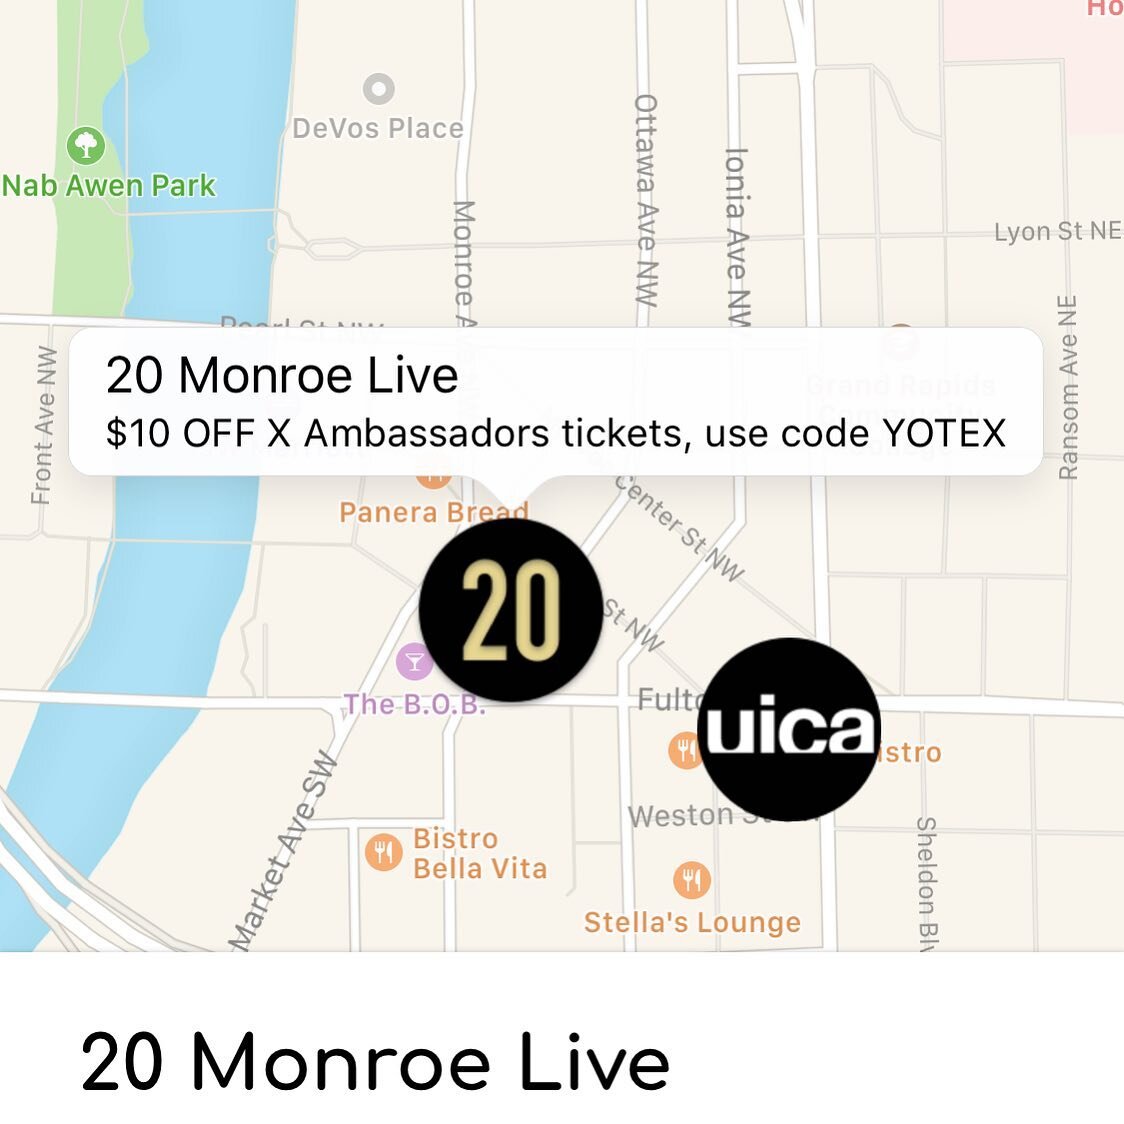 🚀🚀🚀 Get hooked up on tickets for @xambassadors at @20monroelive via the Yote map 🗺 use code: YOTEX